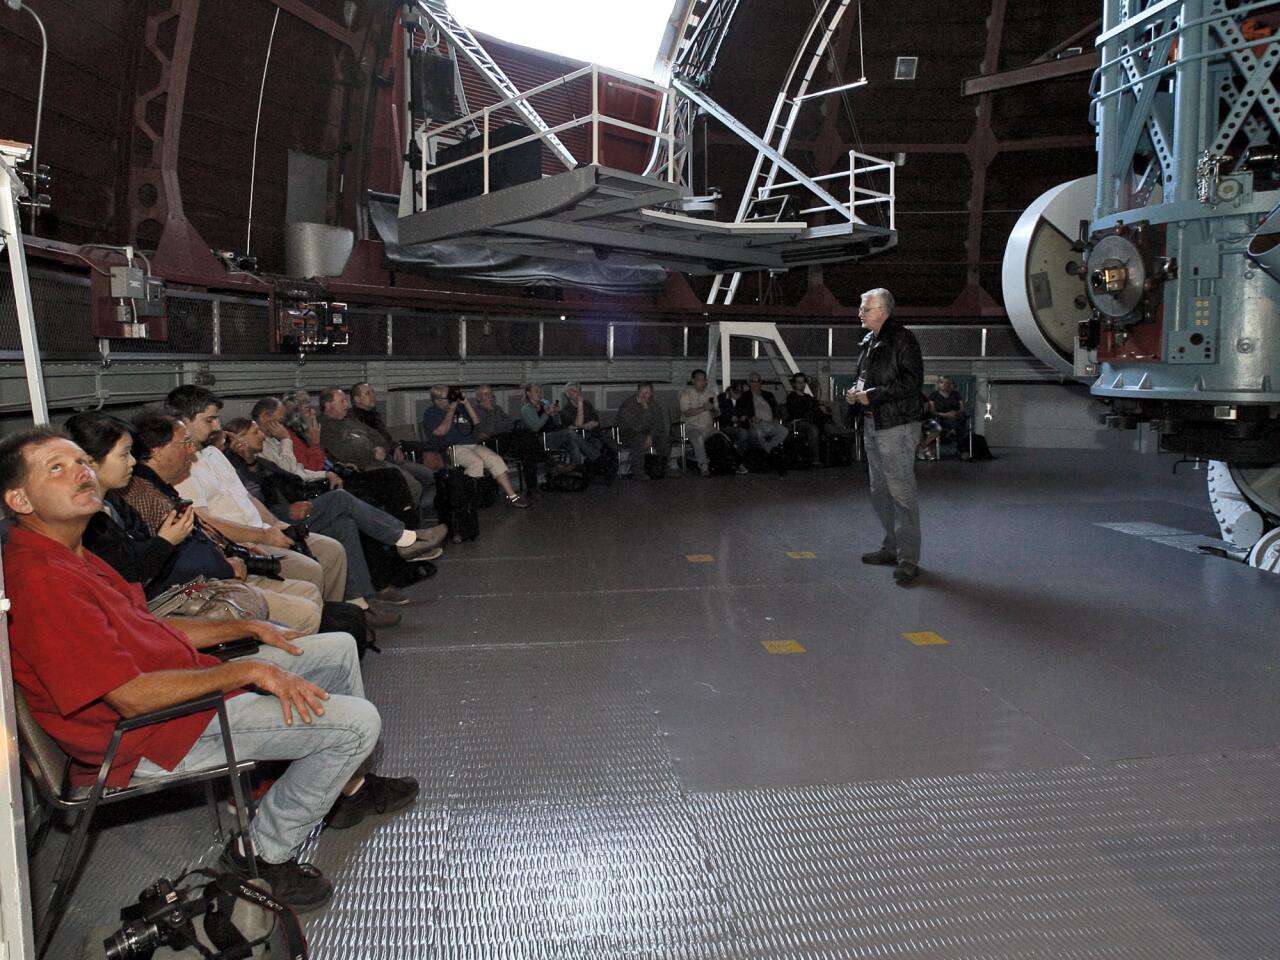 Astronomy buffs listen to Mt. Wilson Observatory Superintendent David Jurasevich talk about the 60-inch telescope at right during an astrophotography workshop at the historic facilities on Sunday, Oct. 14, 2012. The class, first of its type and sponsored by Canon USA and Samy's Camera, brought 25 astrophotography enthusiasts to the observatory high above the city of Pasadena for a night of star photography. The students were able to take some photos through the 60-inch telescope.